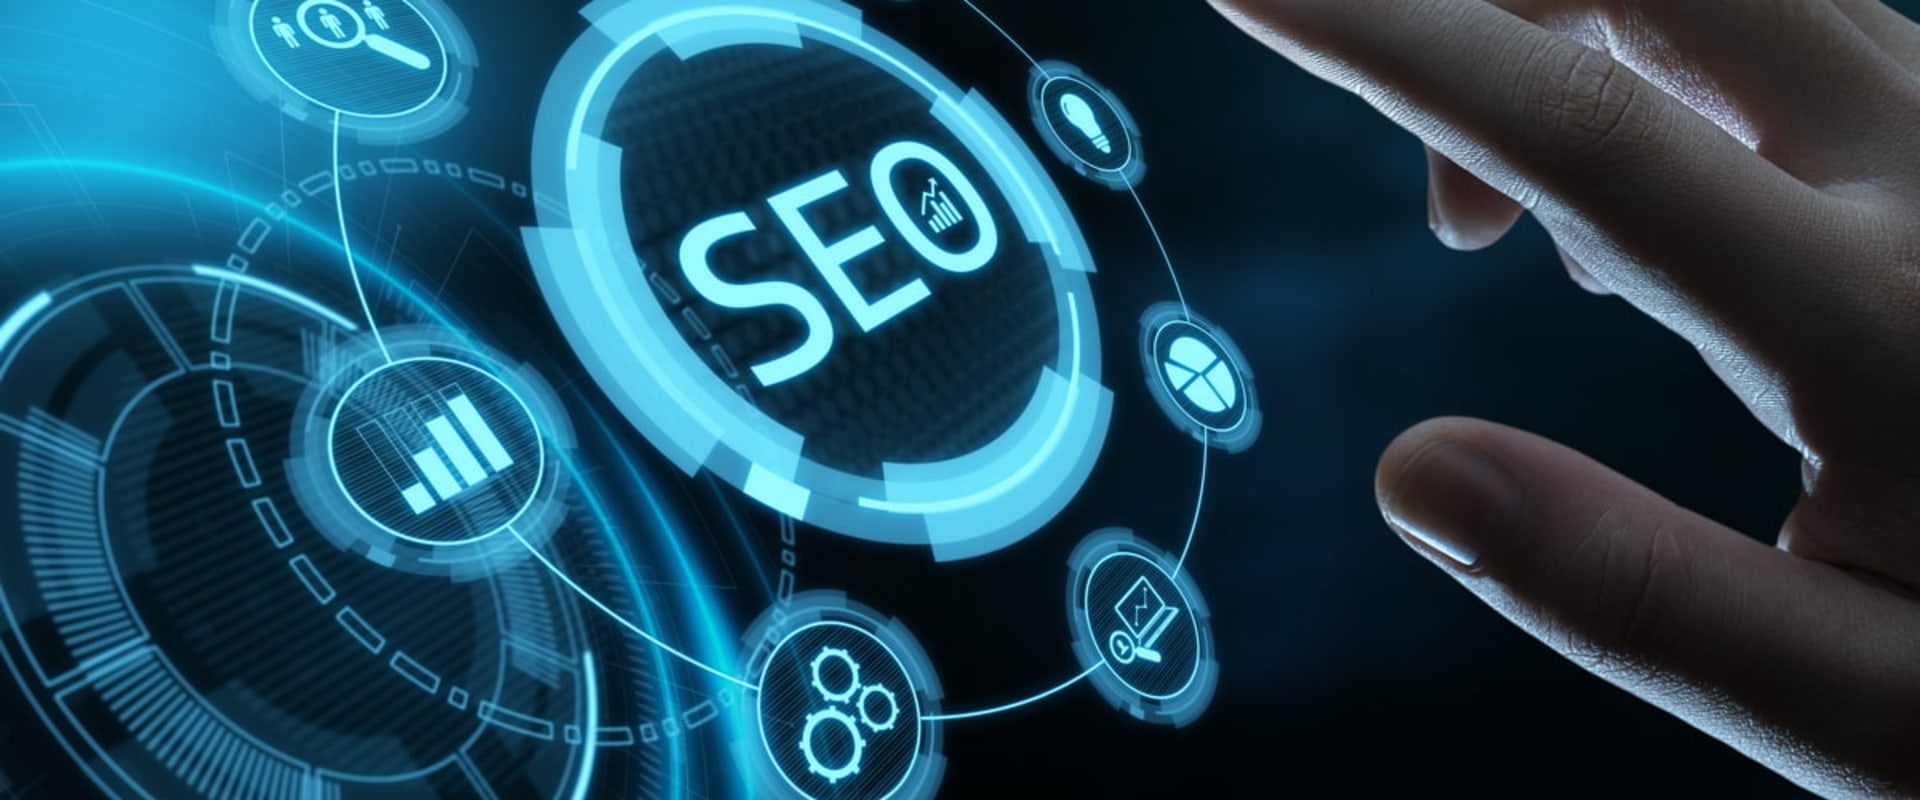 What is seo website optimization?